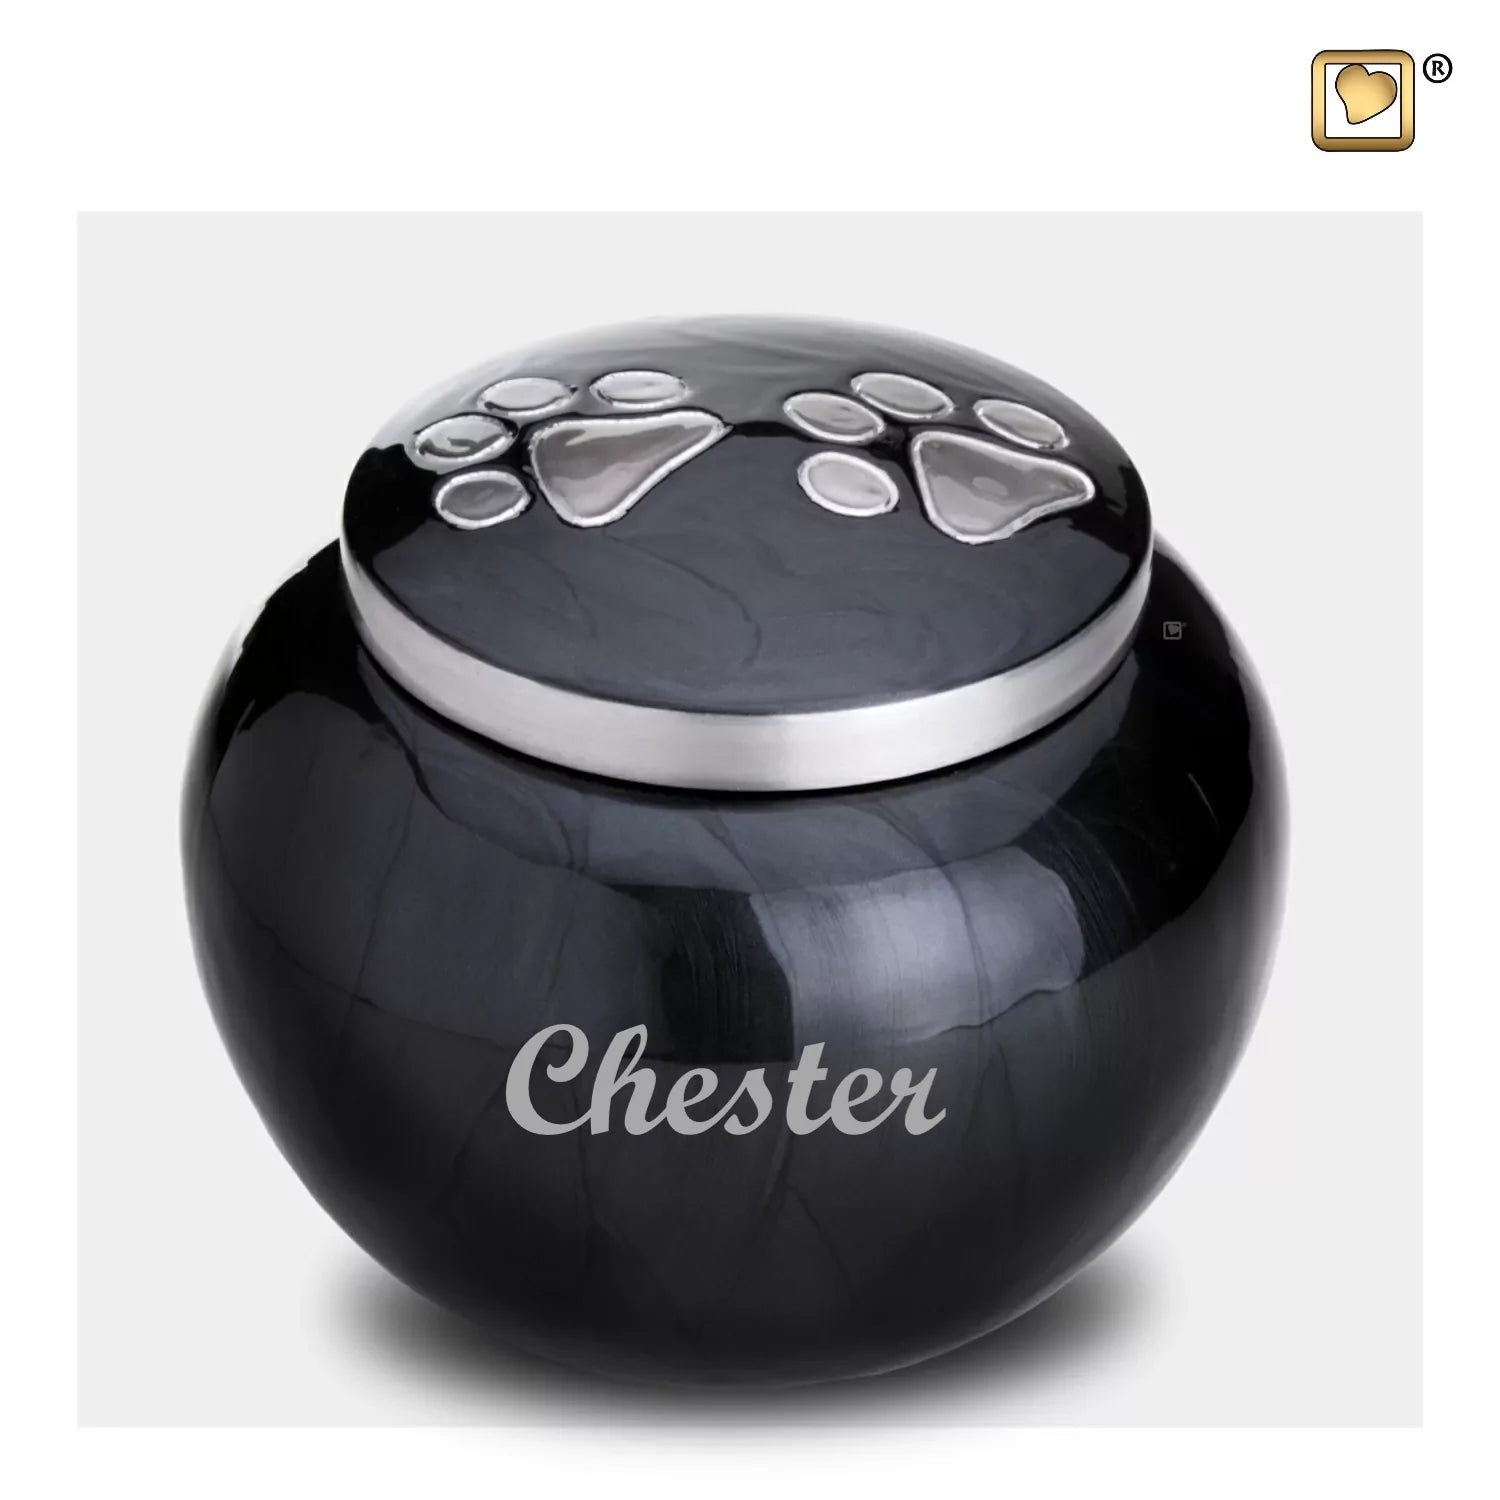 Animal urn - Round black with silver legs - LoveUrns